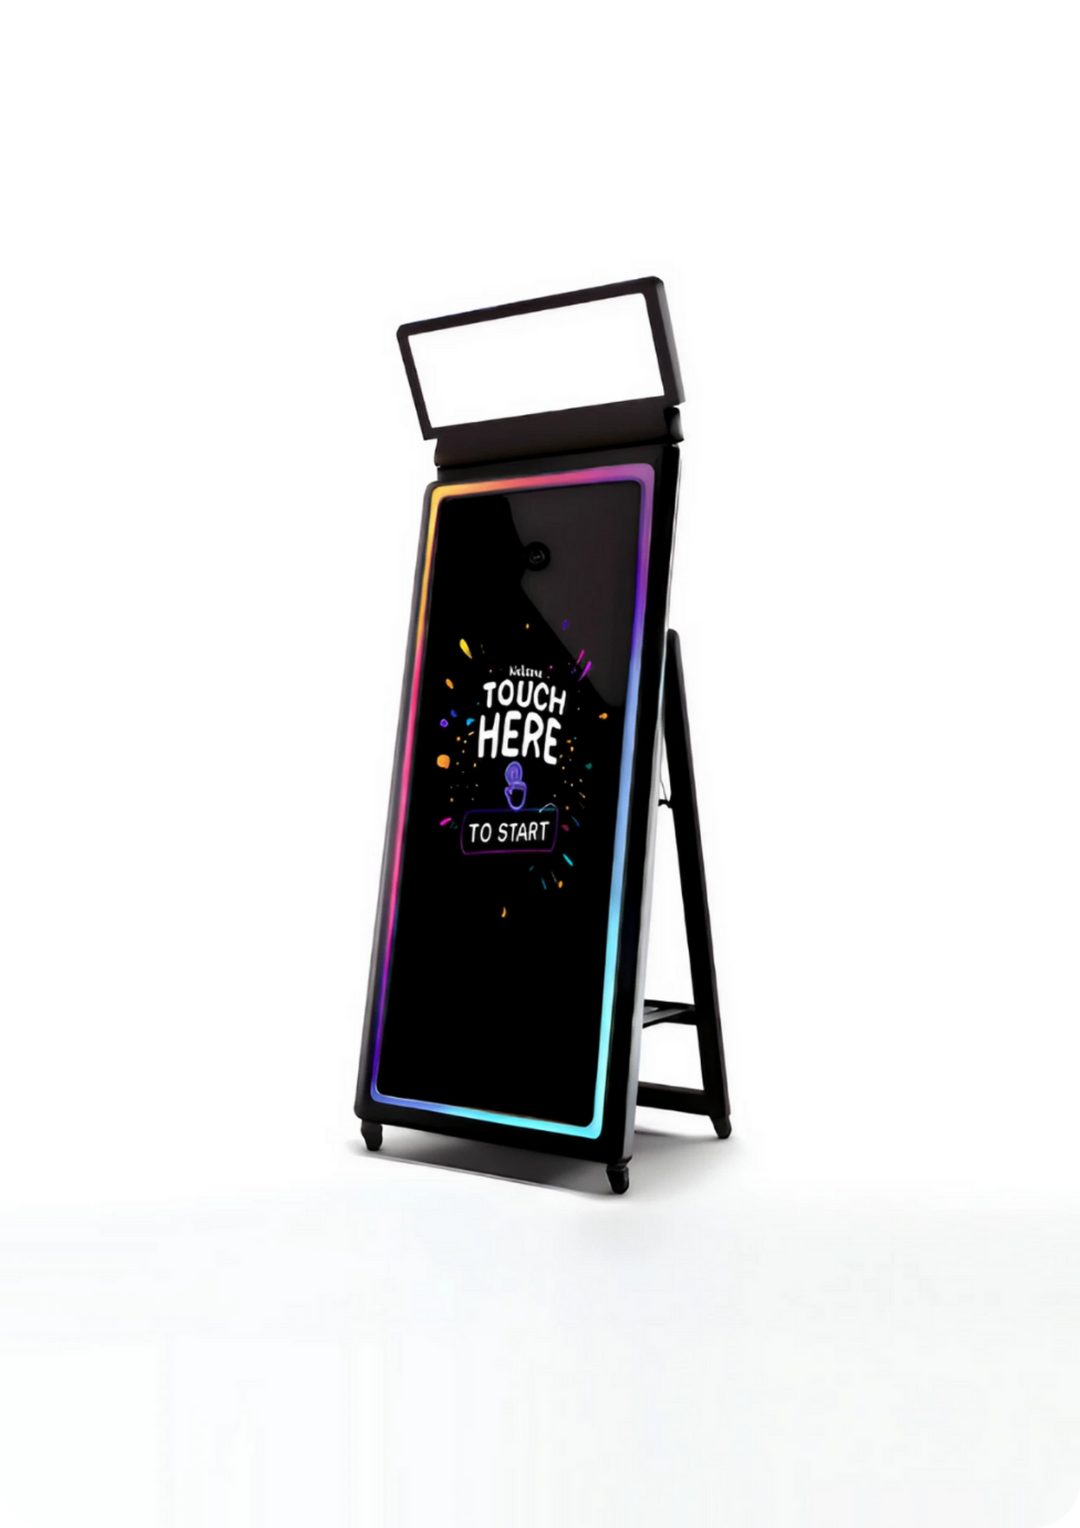 Mirror photo booth featuring a sleek, modern design with a large interactive touchscreen